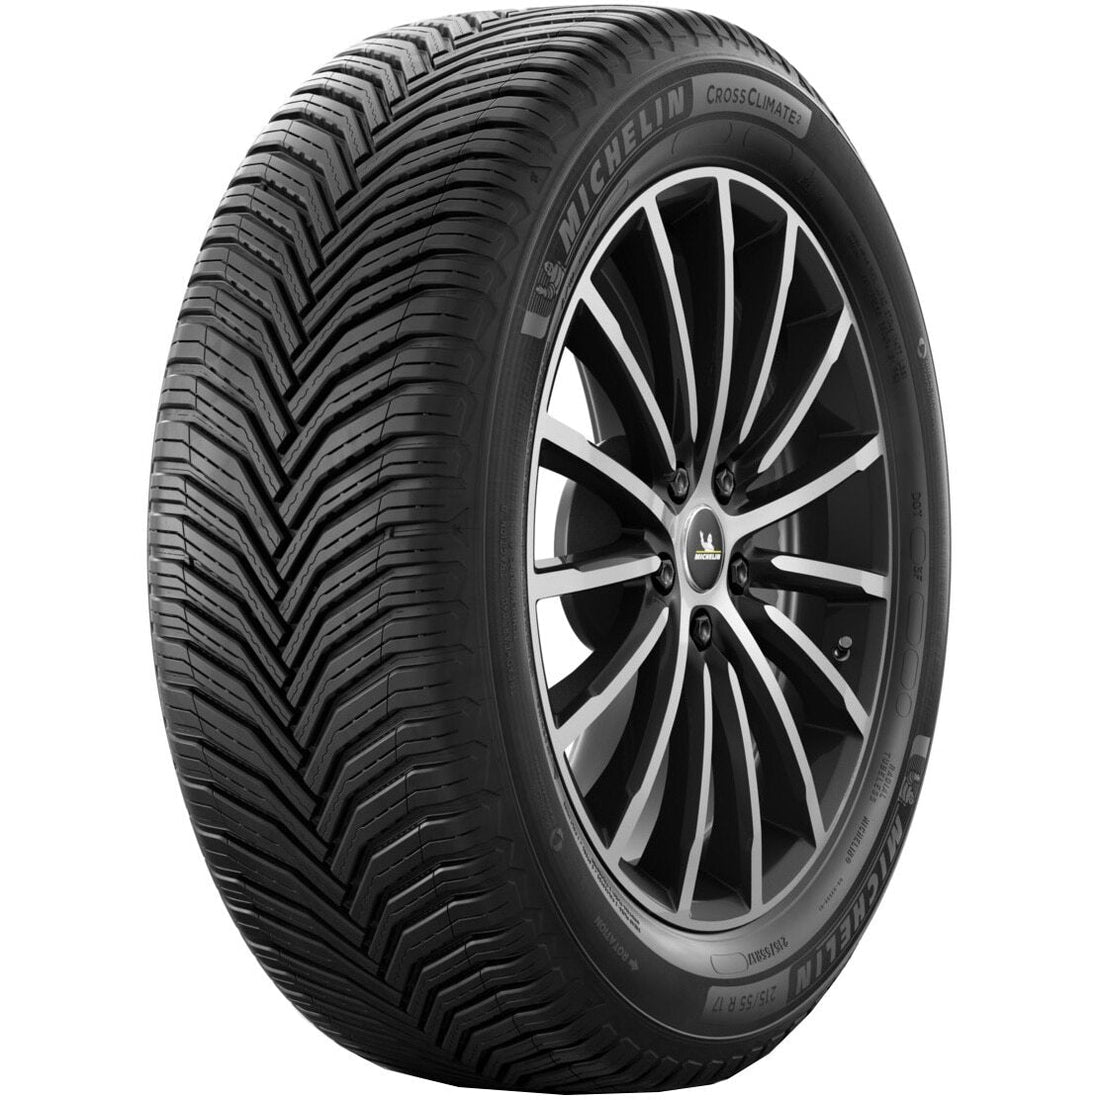 Anvelope All-season Michelin Crossclimate 2 suv 215/50R18 92=630kgW=270 km/h Anvelux